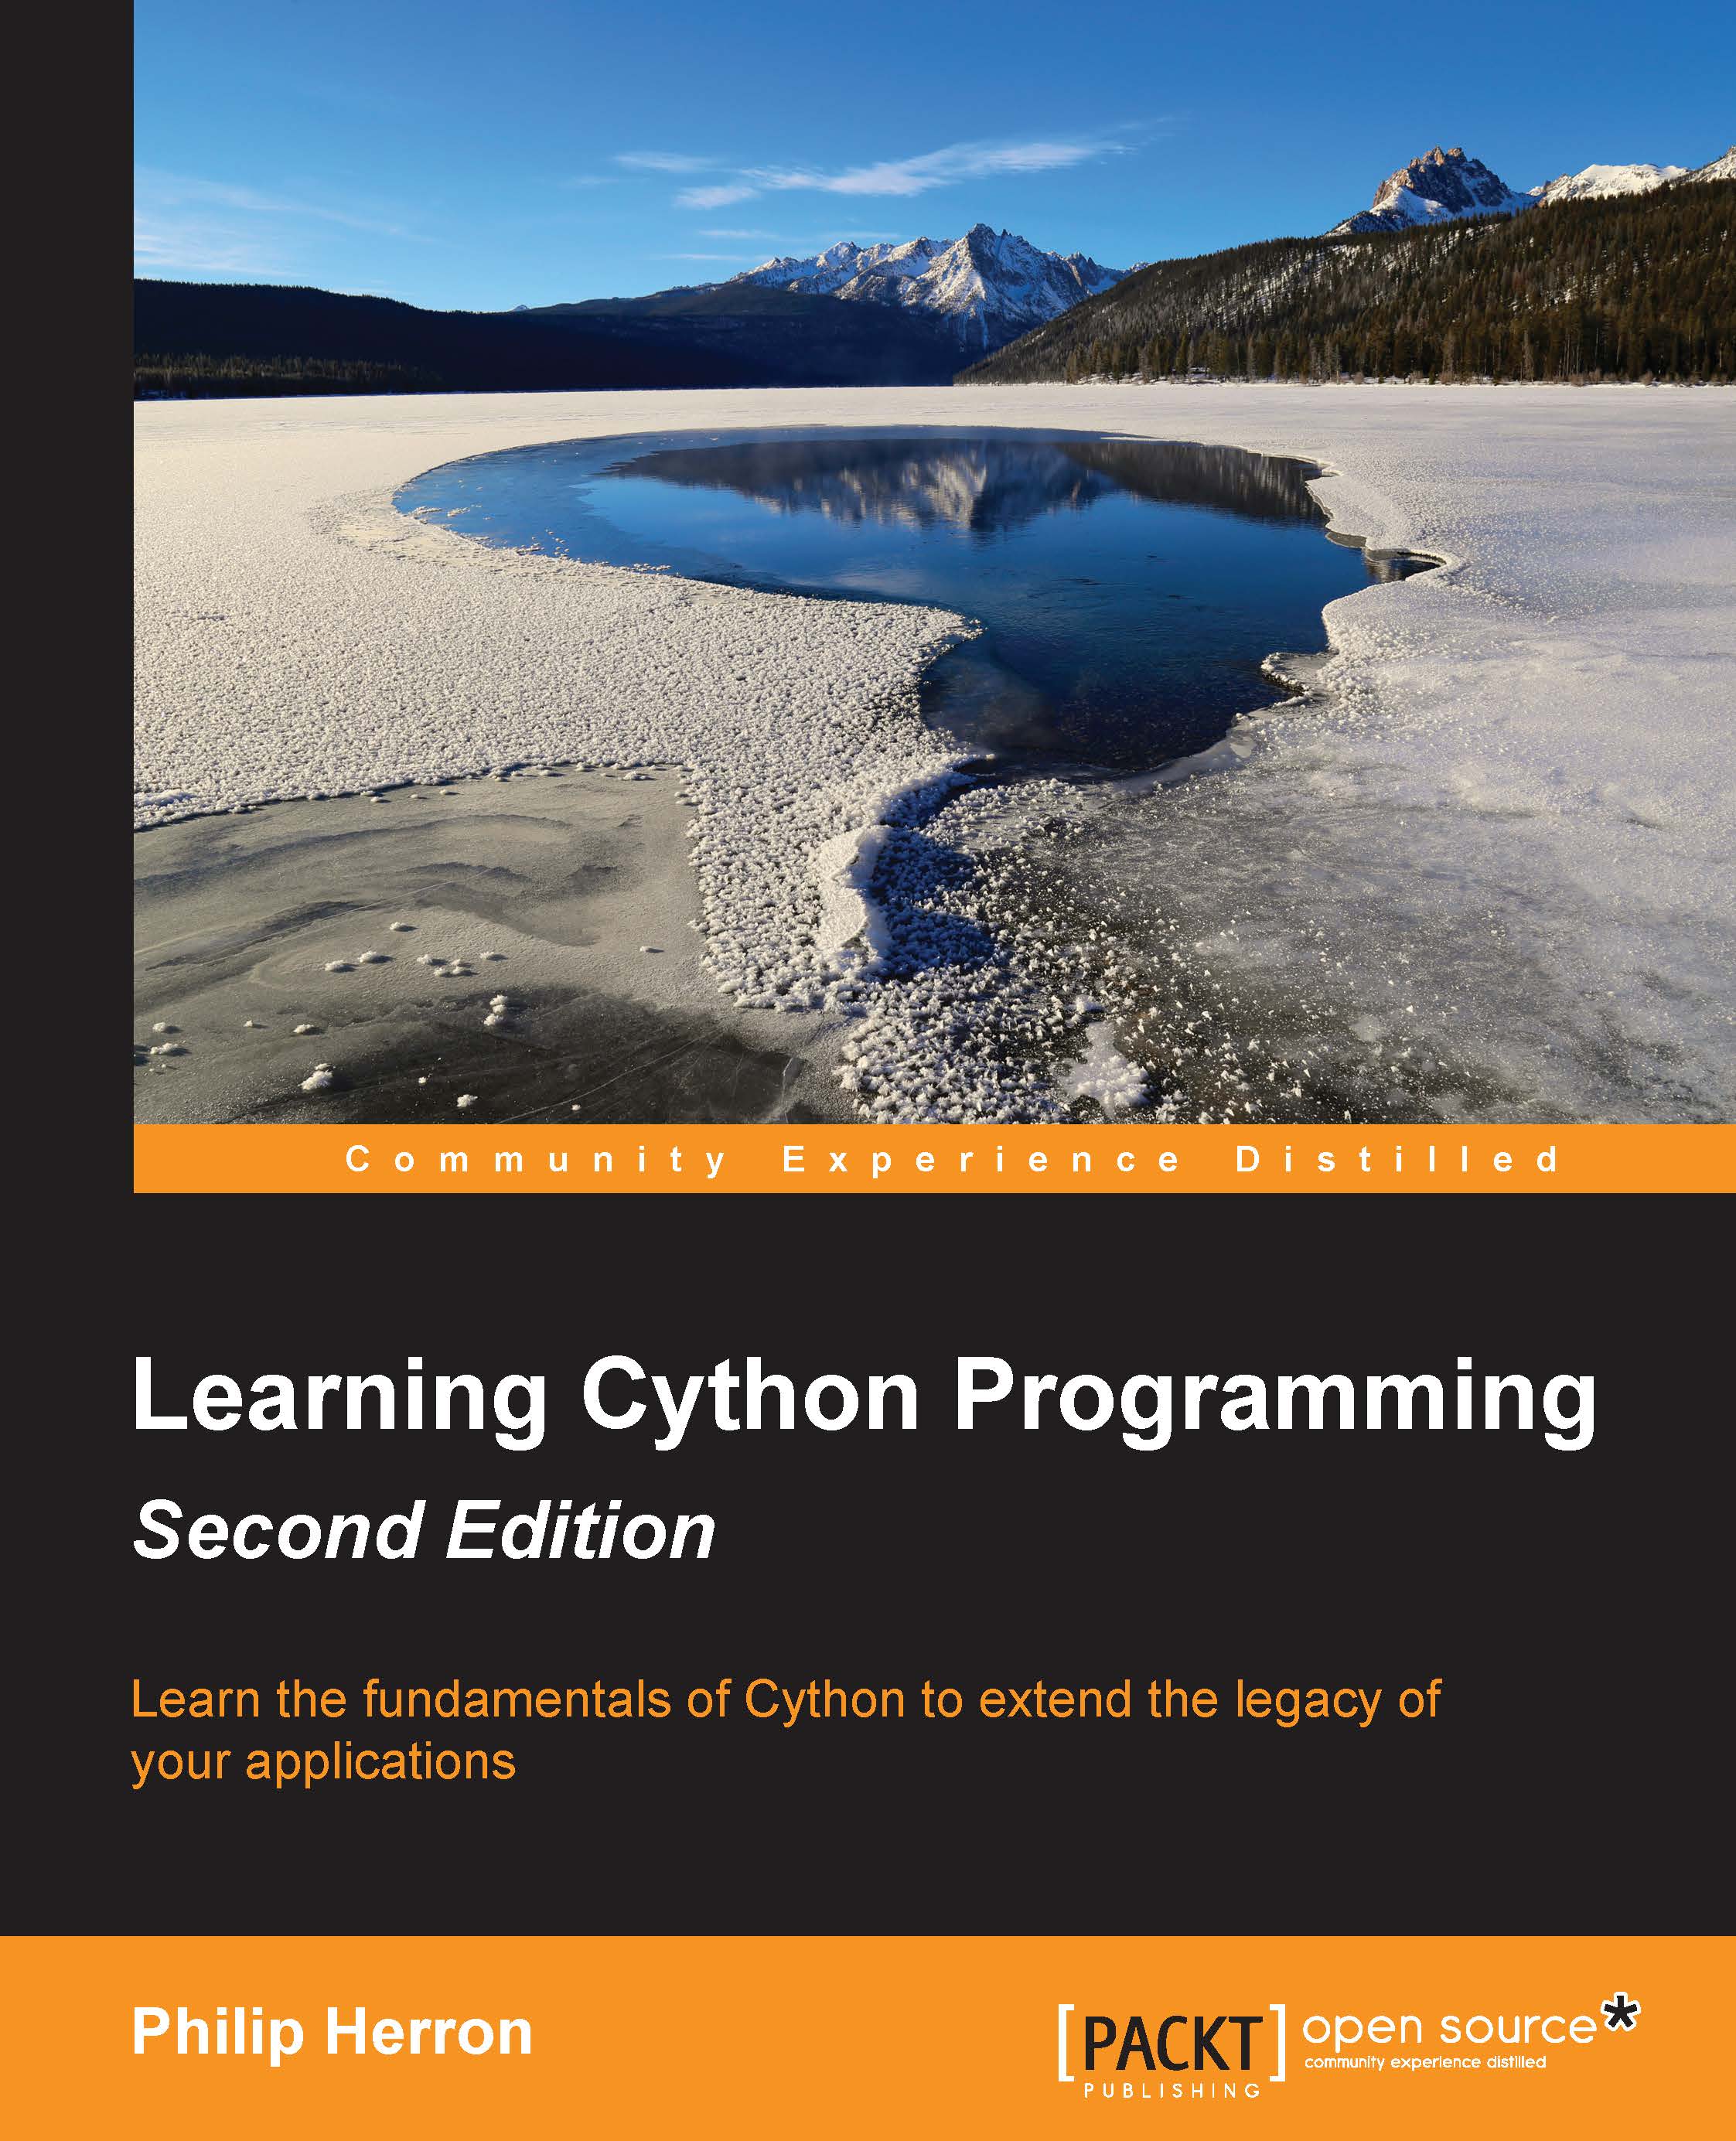 Learning Cython Programming (Second Edition)